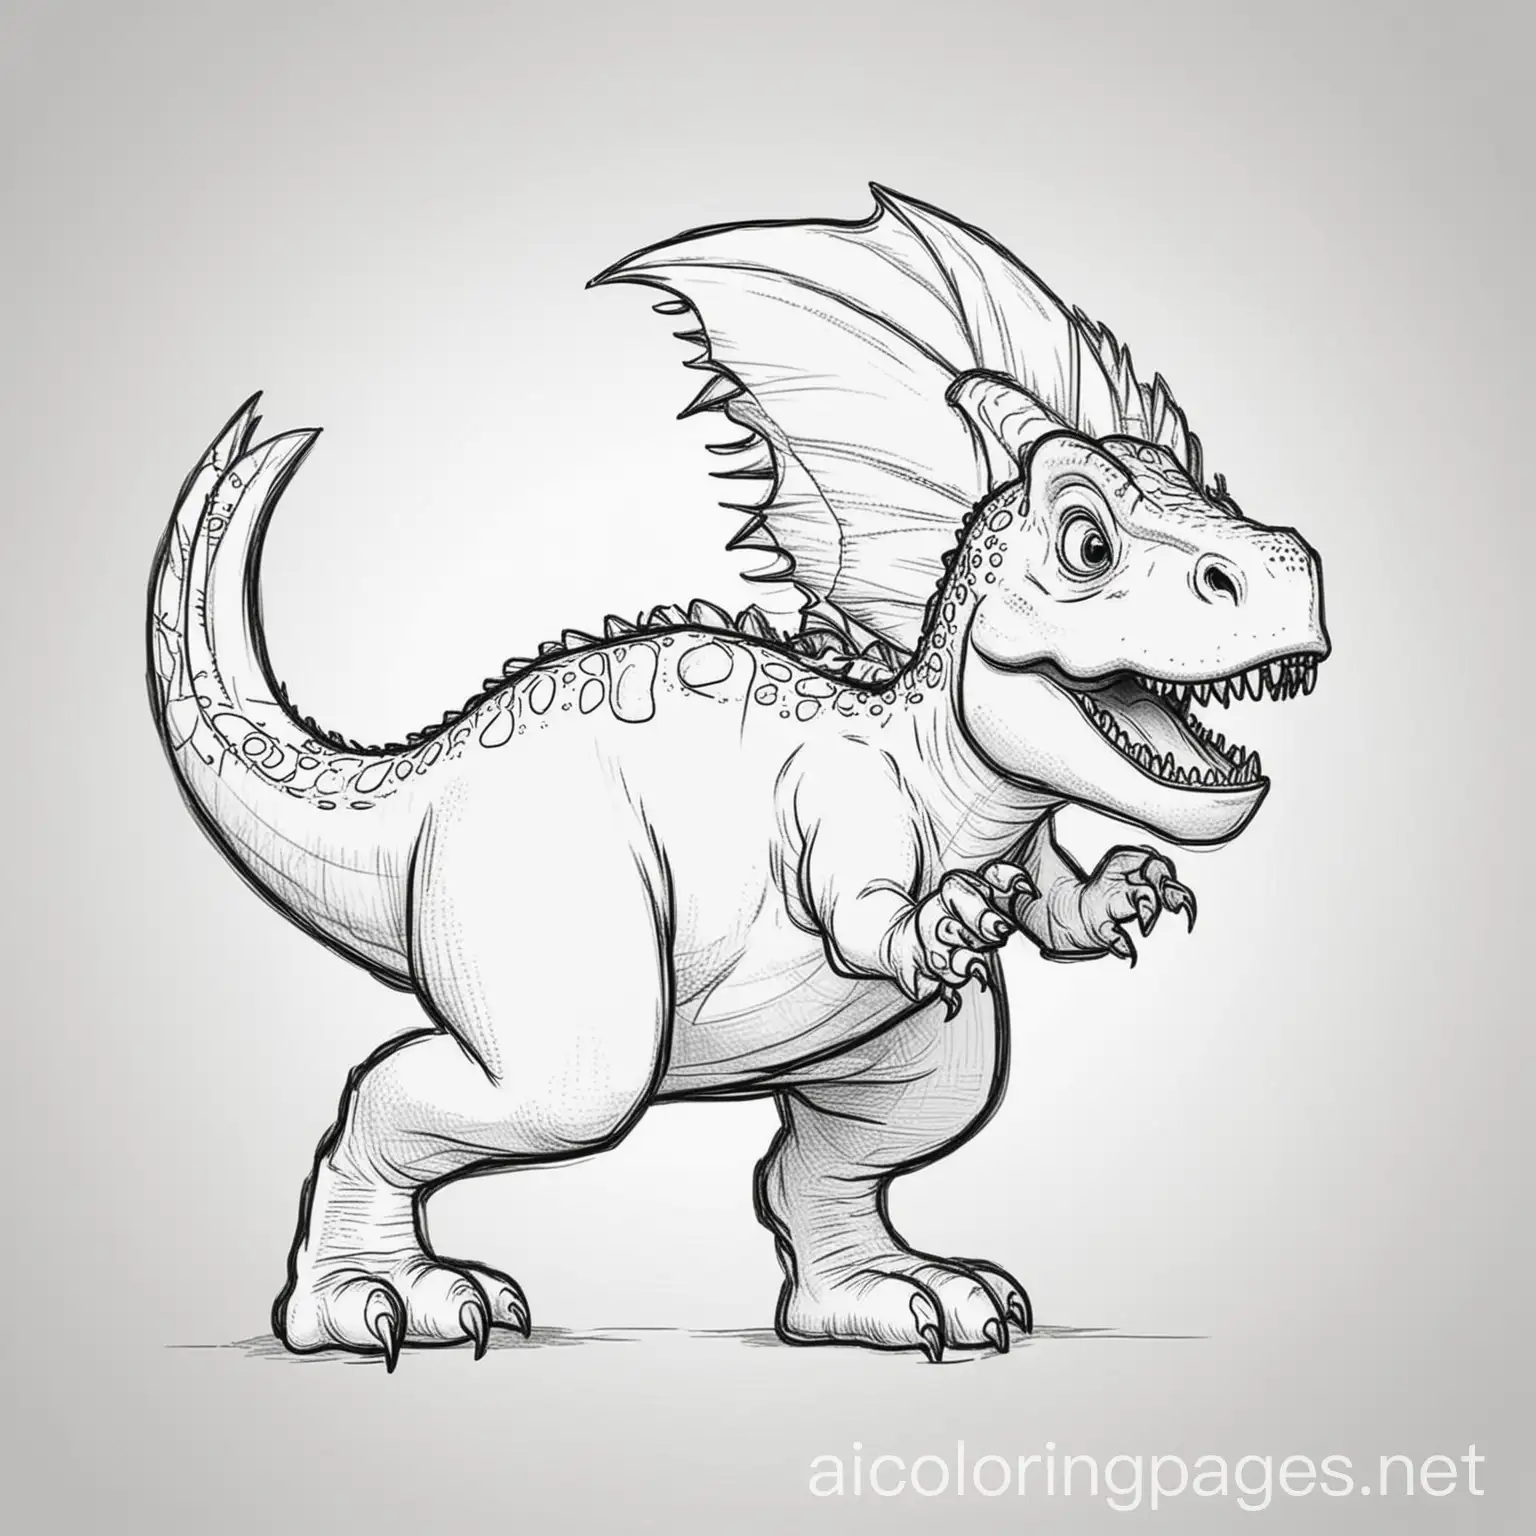 dinosaur, Coloring Page, black and white, line art, white background, Simplicity, Ample White Space. The background of the coloring page is plain white to make it easy for young children to color within the lines. The outlines of all the subjects are easy to distinguish, making it simple for kids to color without too much difficulty